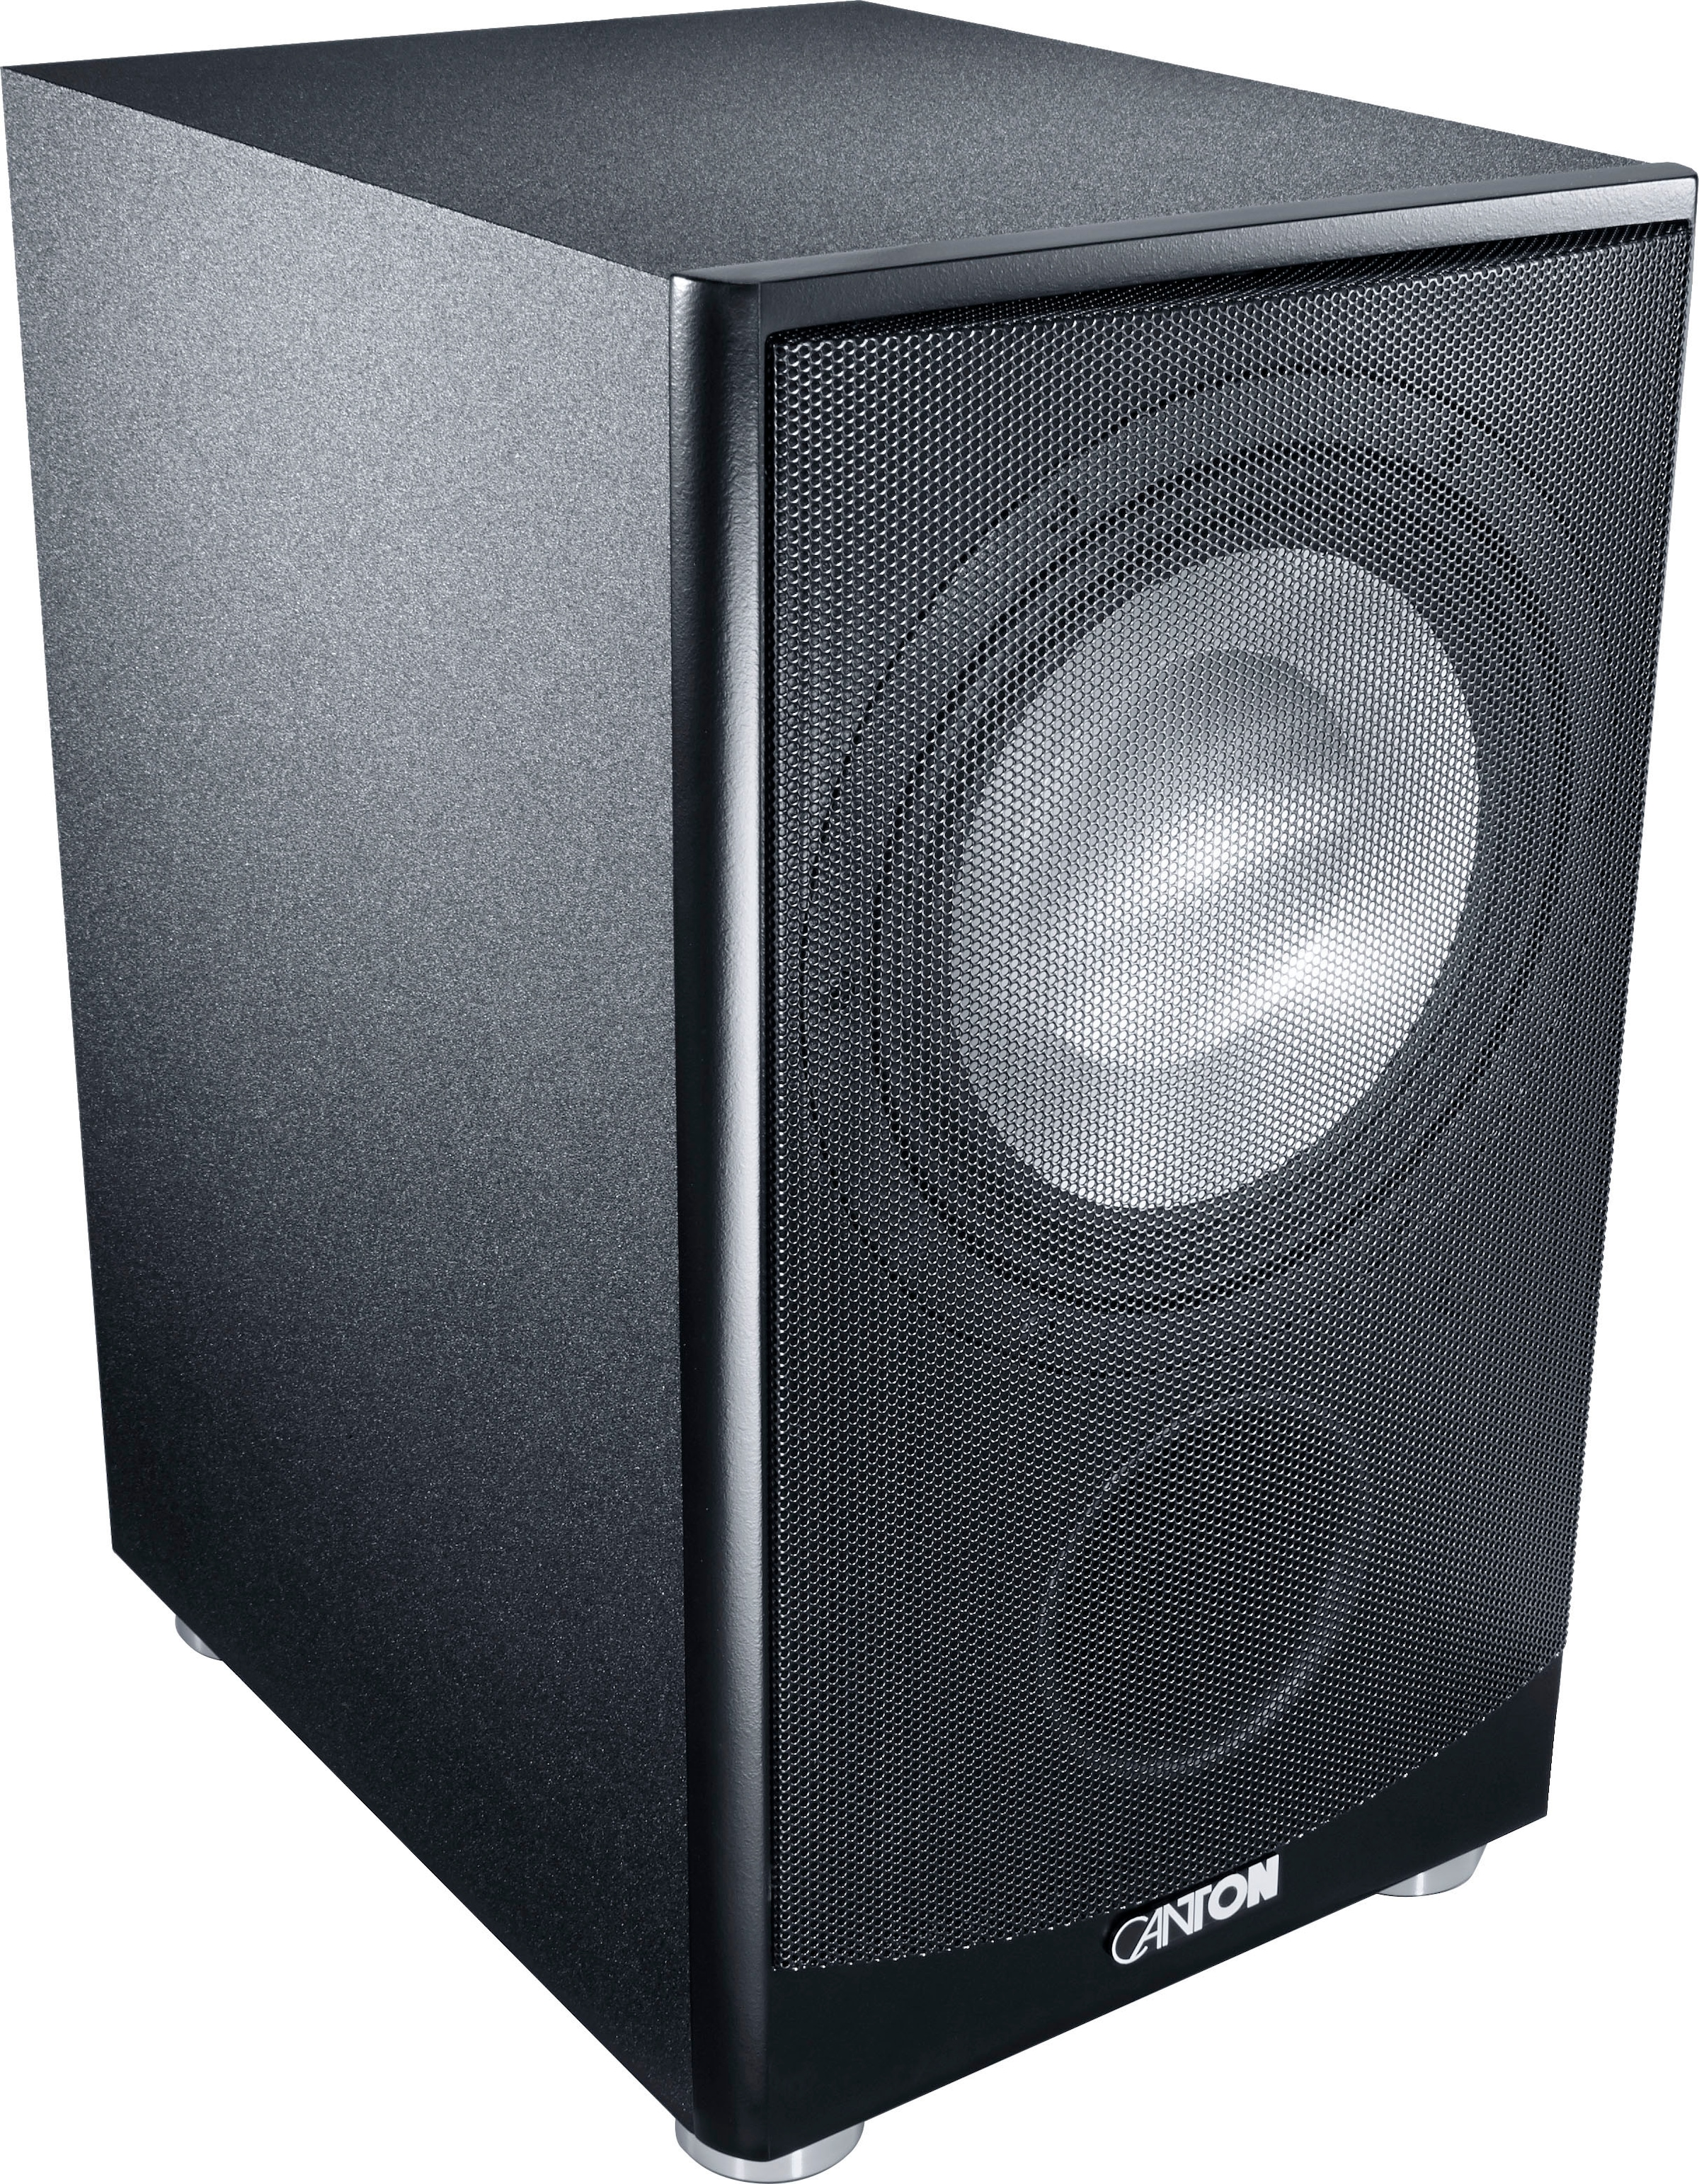 CANTON Subwoofer »AS 85.3«